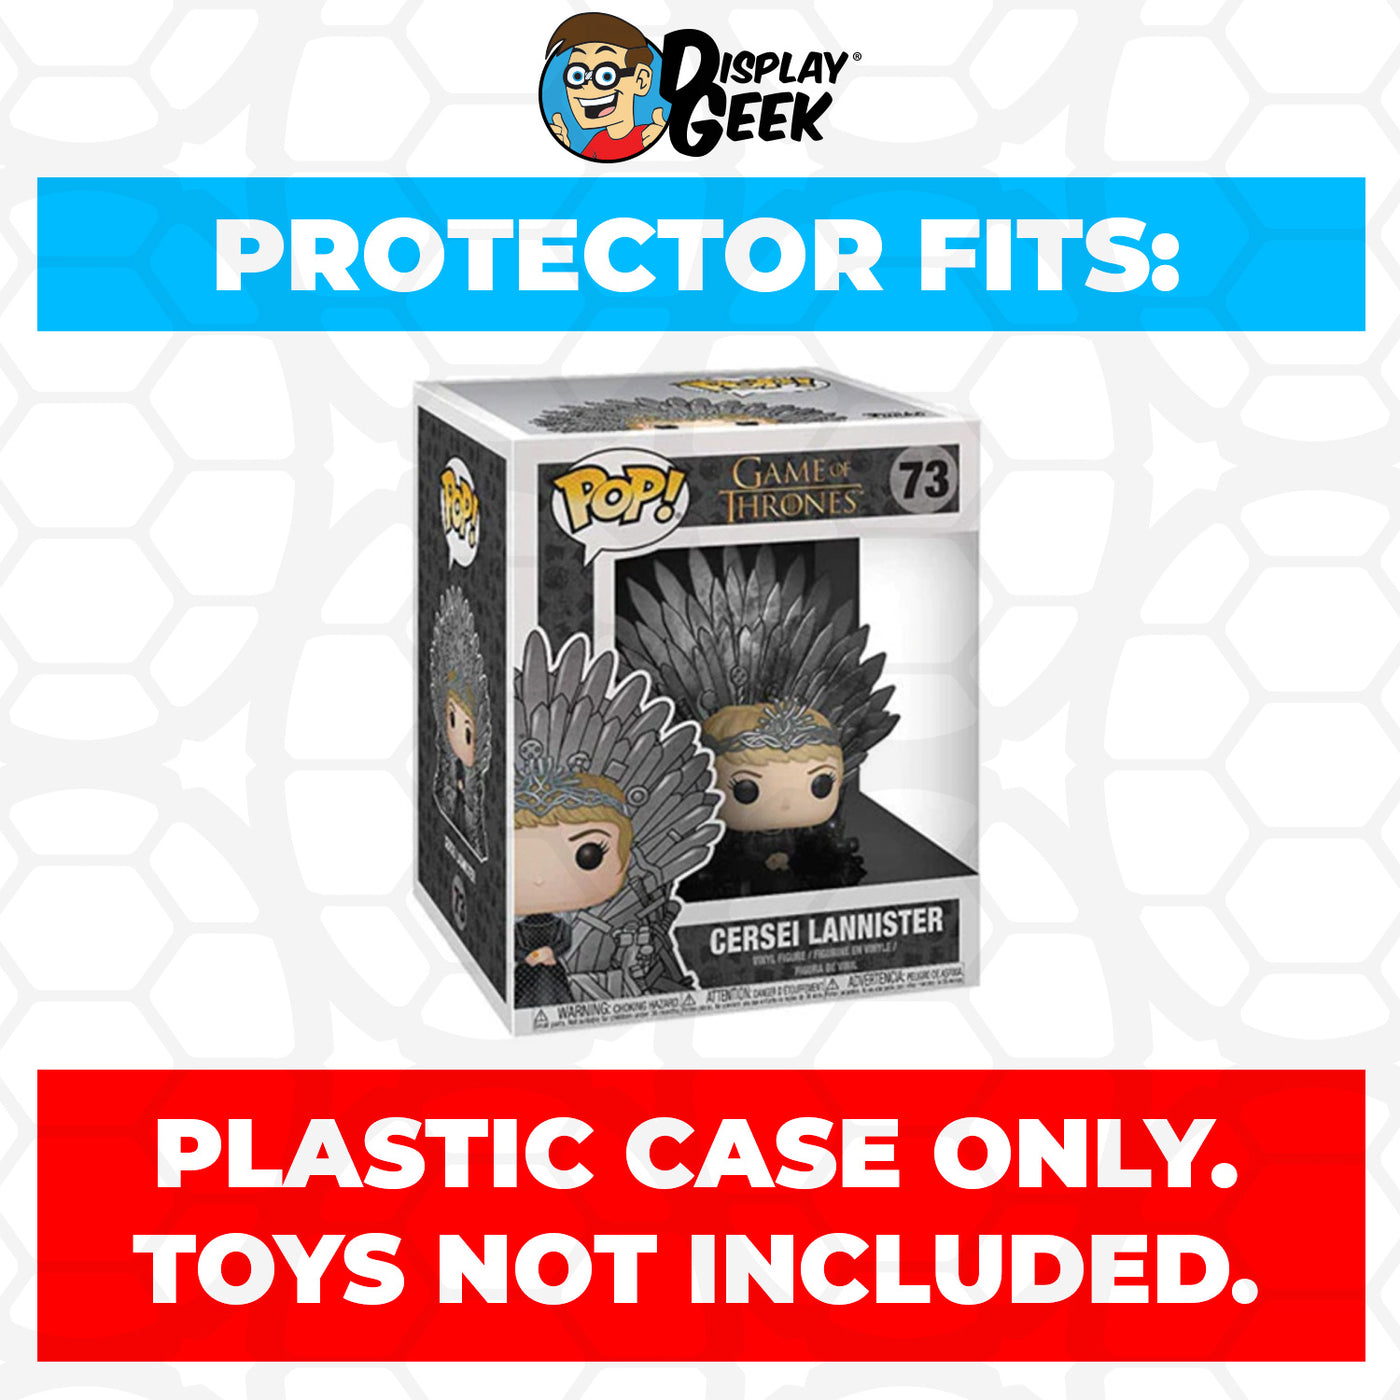 Pop Protector for 6 inch Cersei Lannister Iron Throne #73 Super Funko Pop on The Protector Guide App by Display Geek